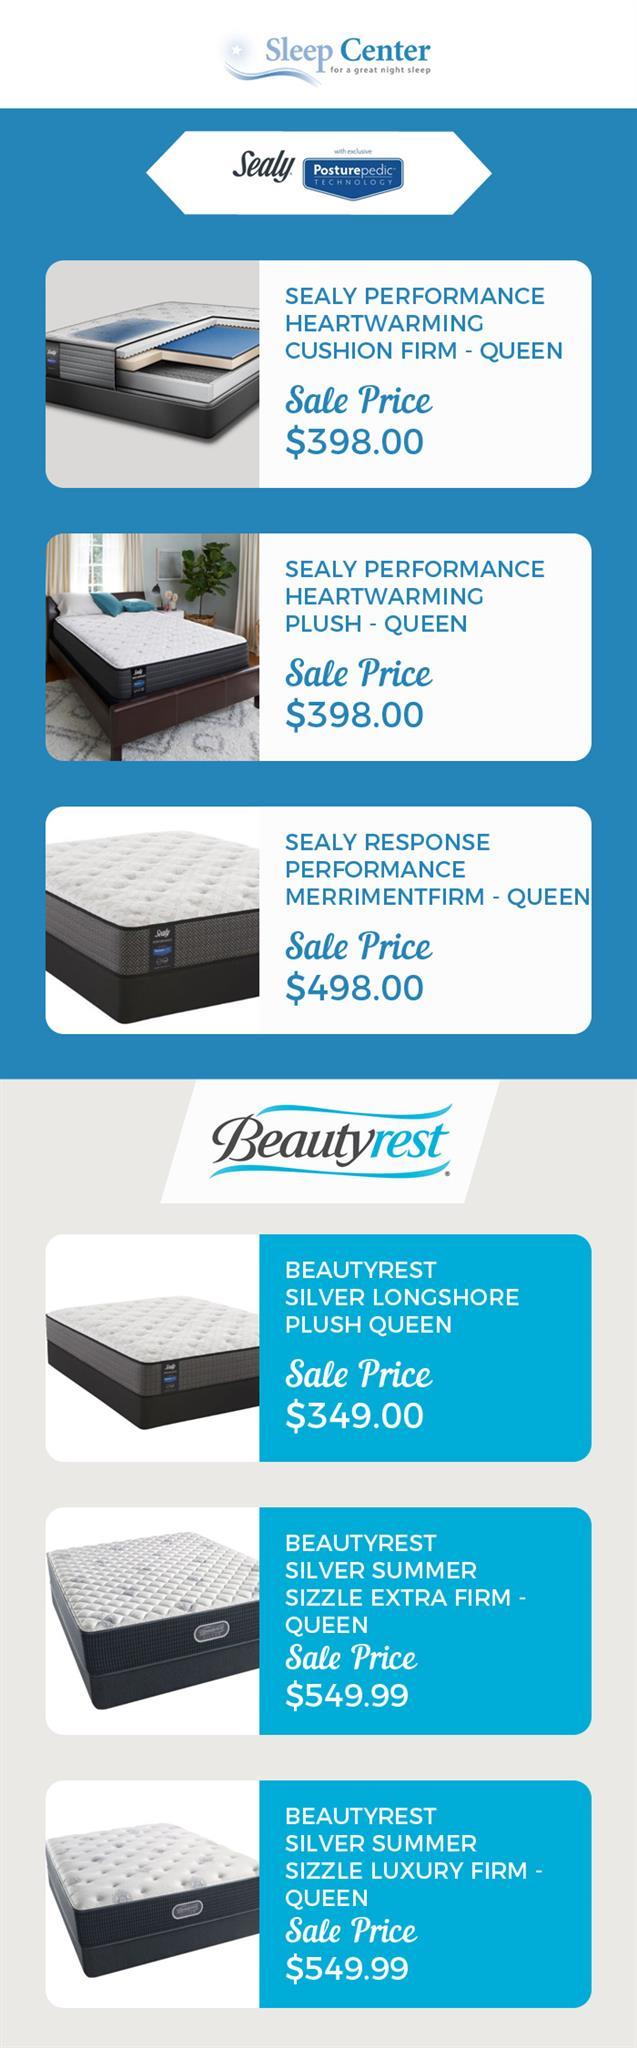 Sleep Center – A Well Known Furniture Store for Sealy & Beautyrest Mattresses in Sacramento, CA